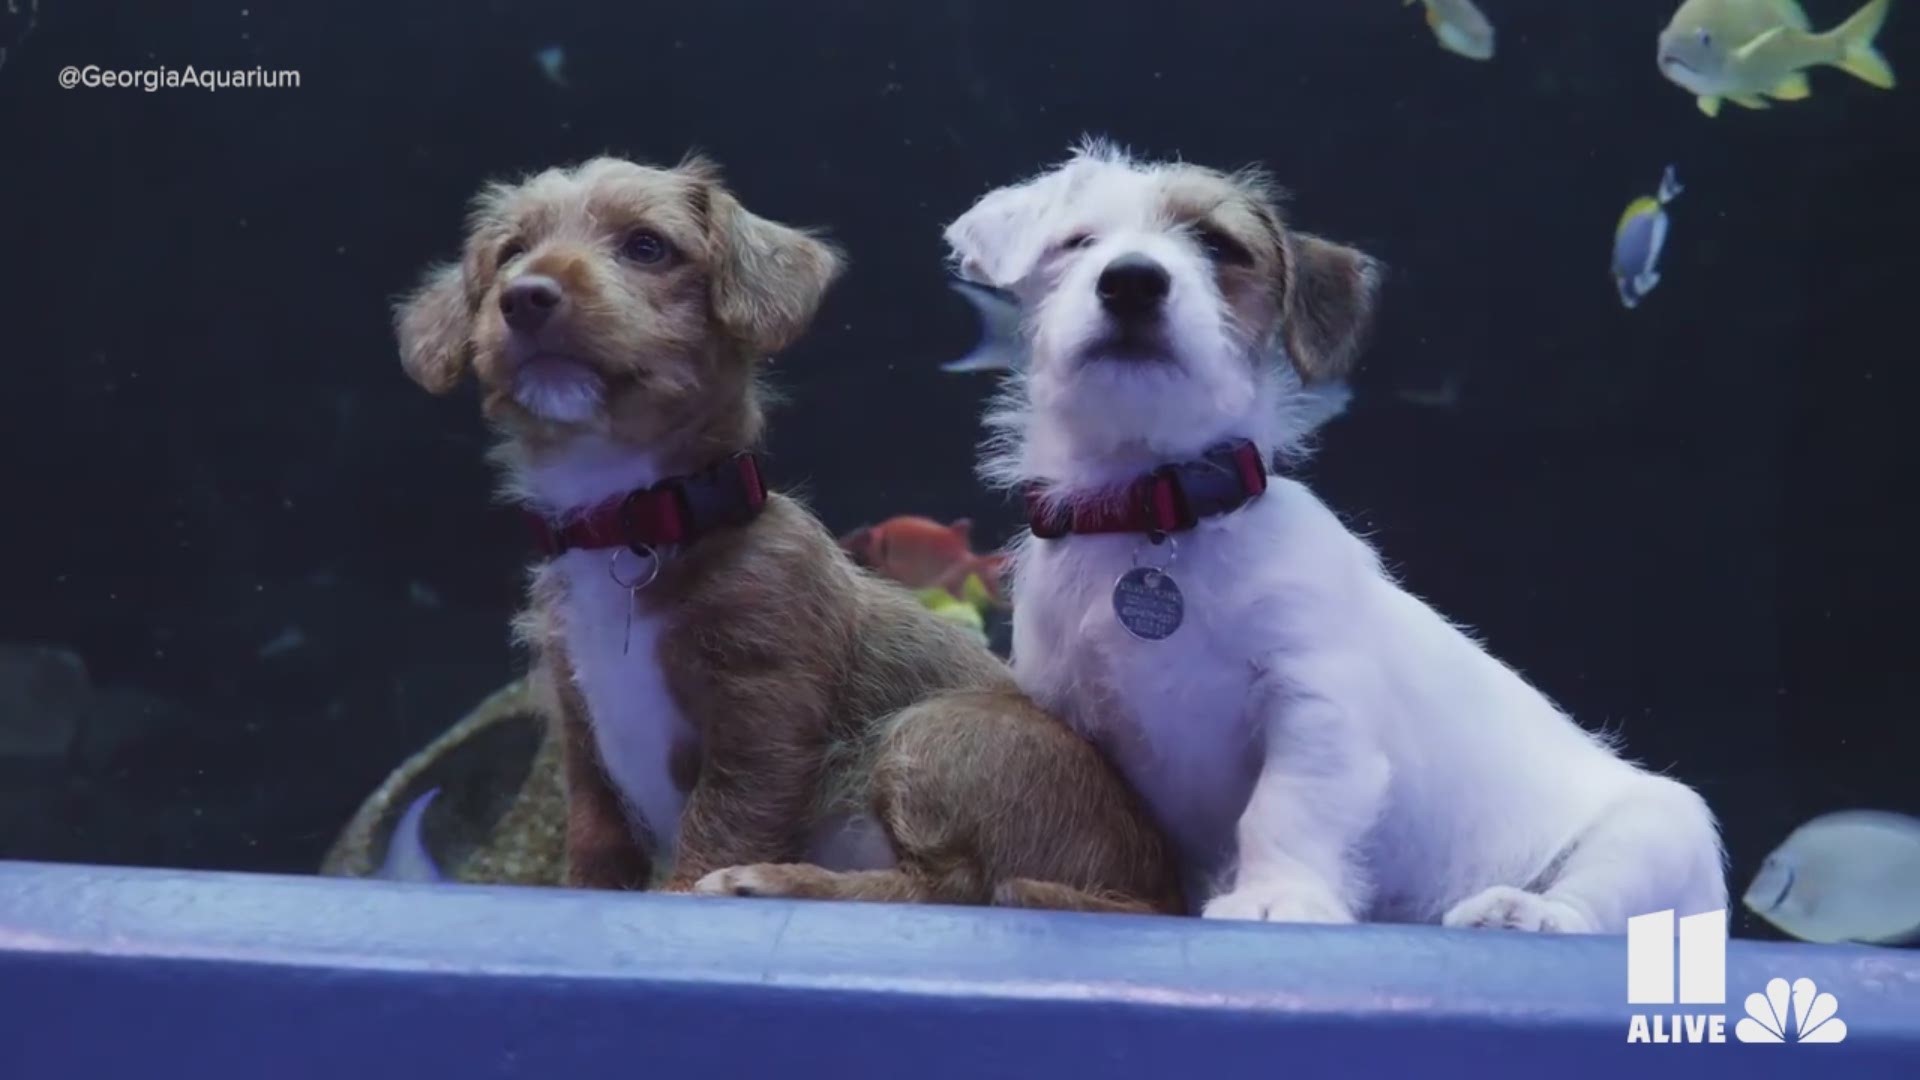 Atlanta Humane Society treated two puppies, Carmel and Odie, who are currently in foster homes, for an afternoon to explore our Ocean Voyager gallery.